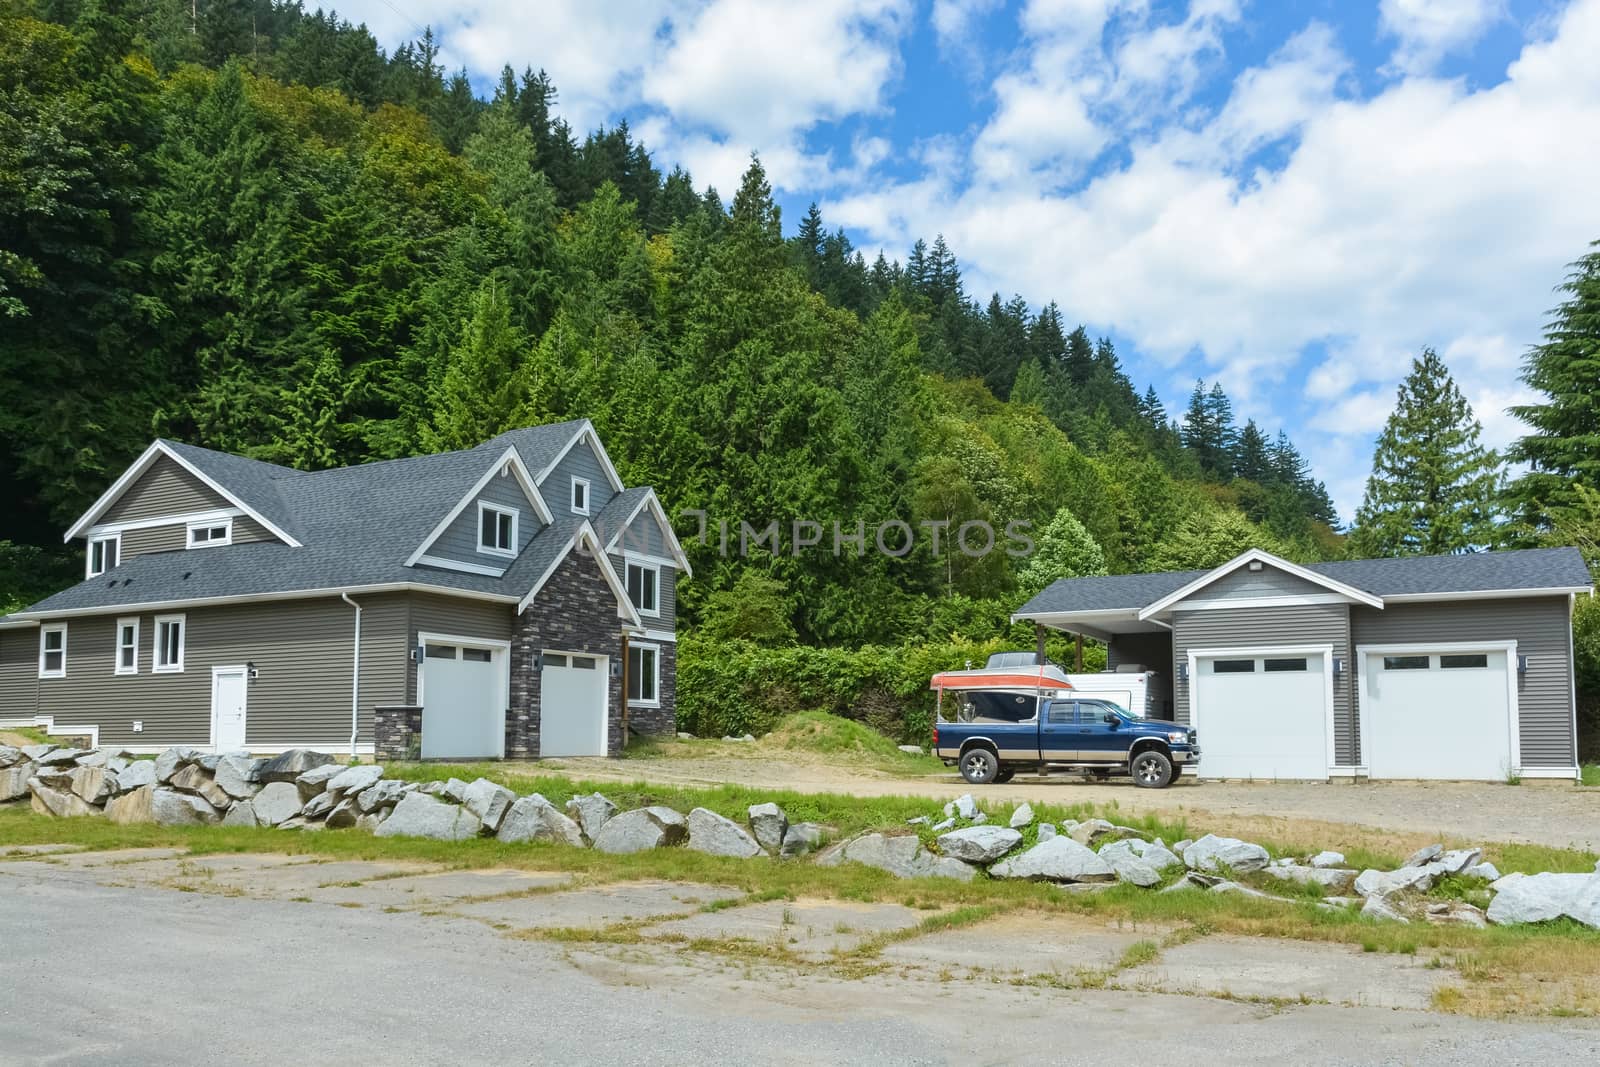 Brand new family house with car and boat parked on gravel driveway. New residential house and detached double garage on country side in British Columbia, Canada